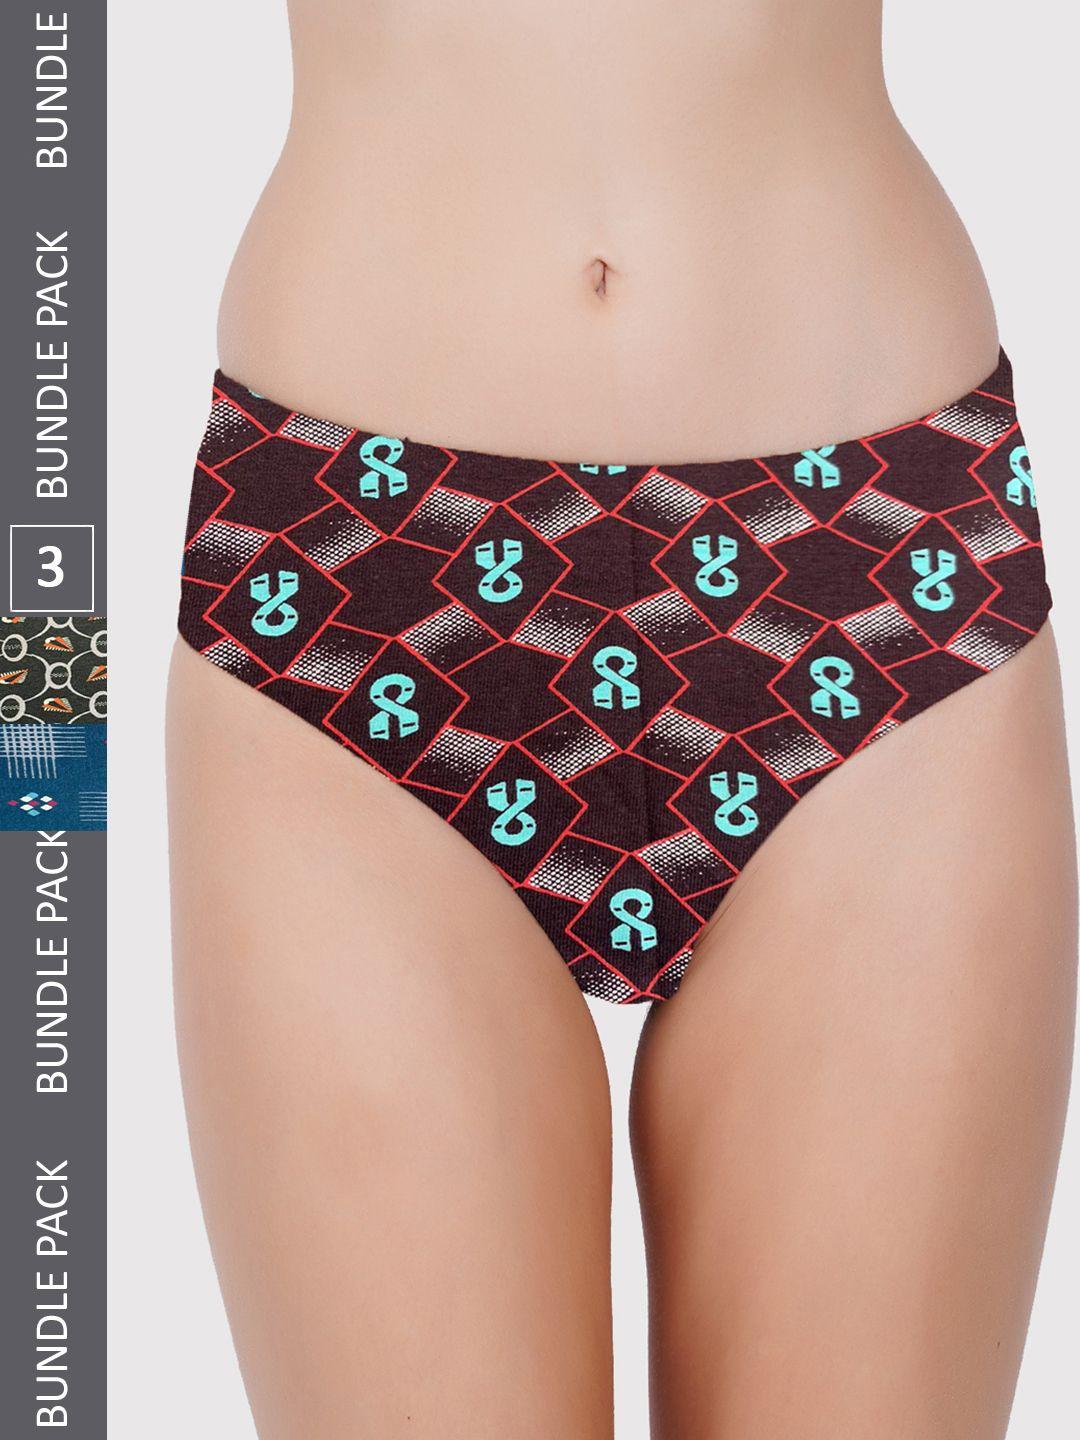 pride apparel women pack of 3 printed cotton hipster briefs womens-new print-0a-03-l1-80